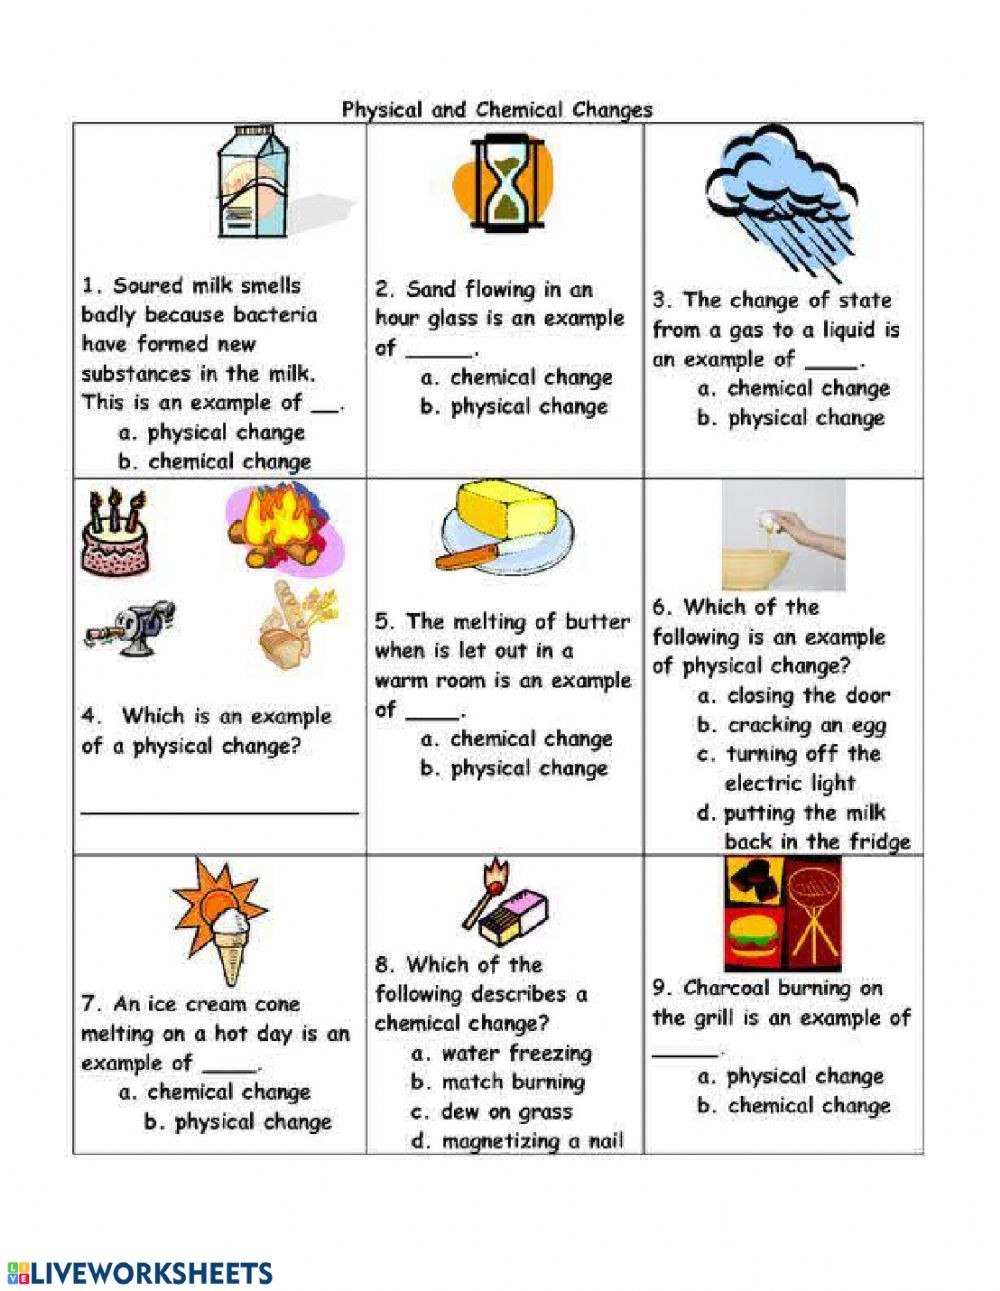 Physical and Chemical Changes Worksheet Physical and Chemical Changes Interactive Worksheet